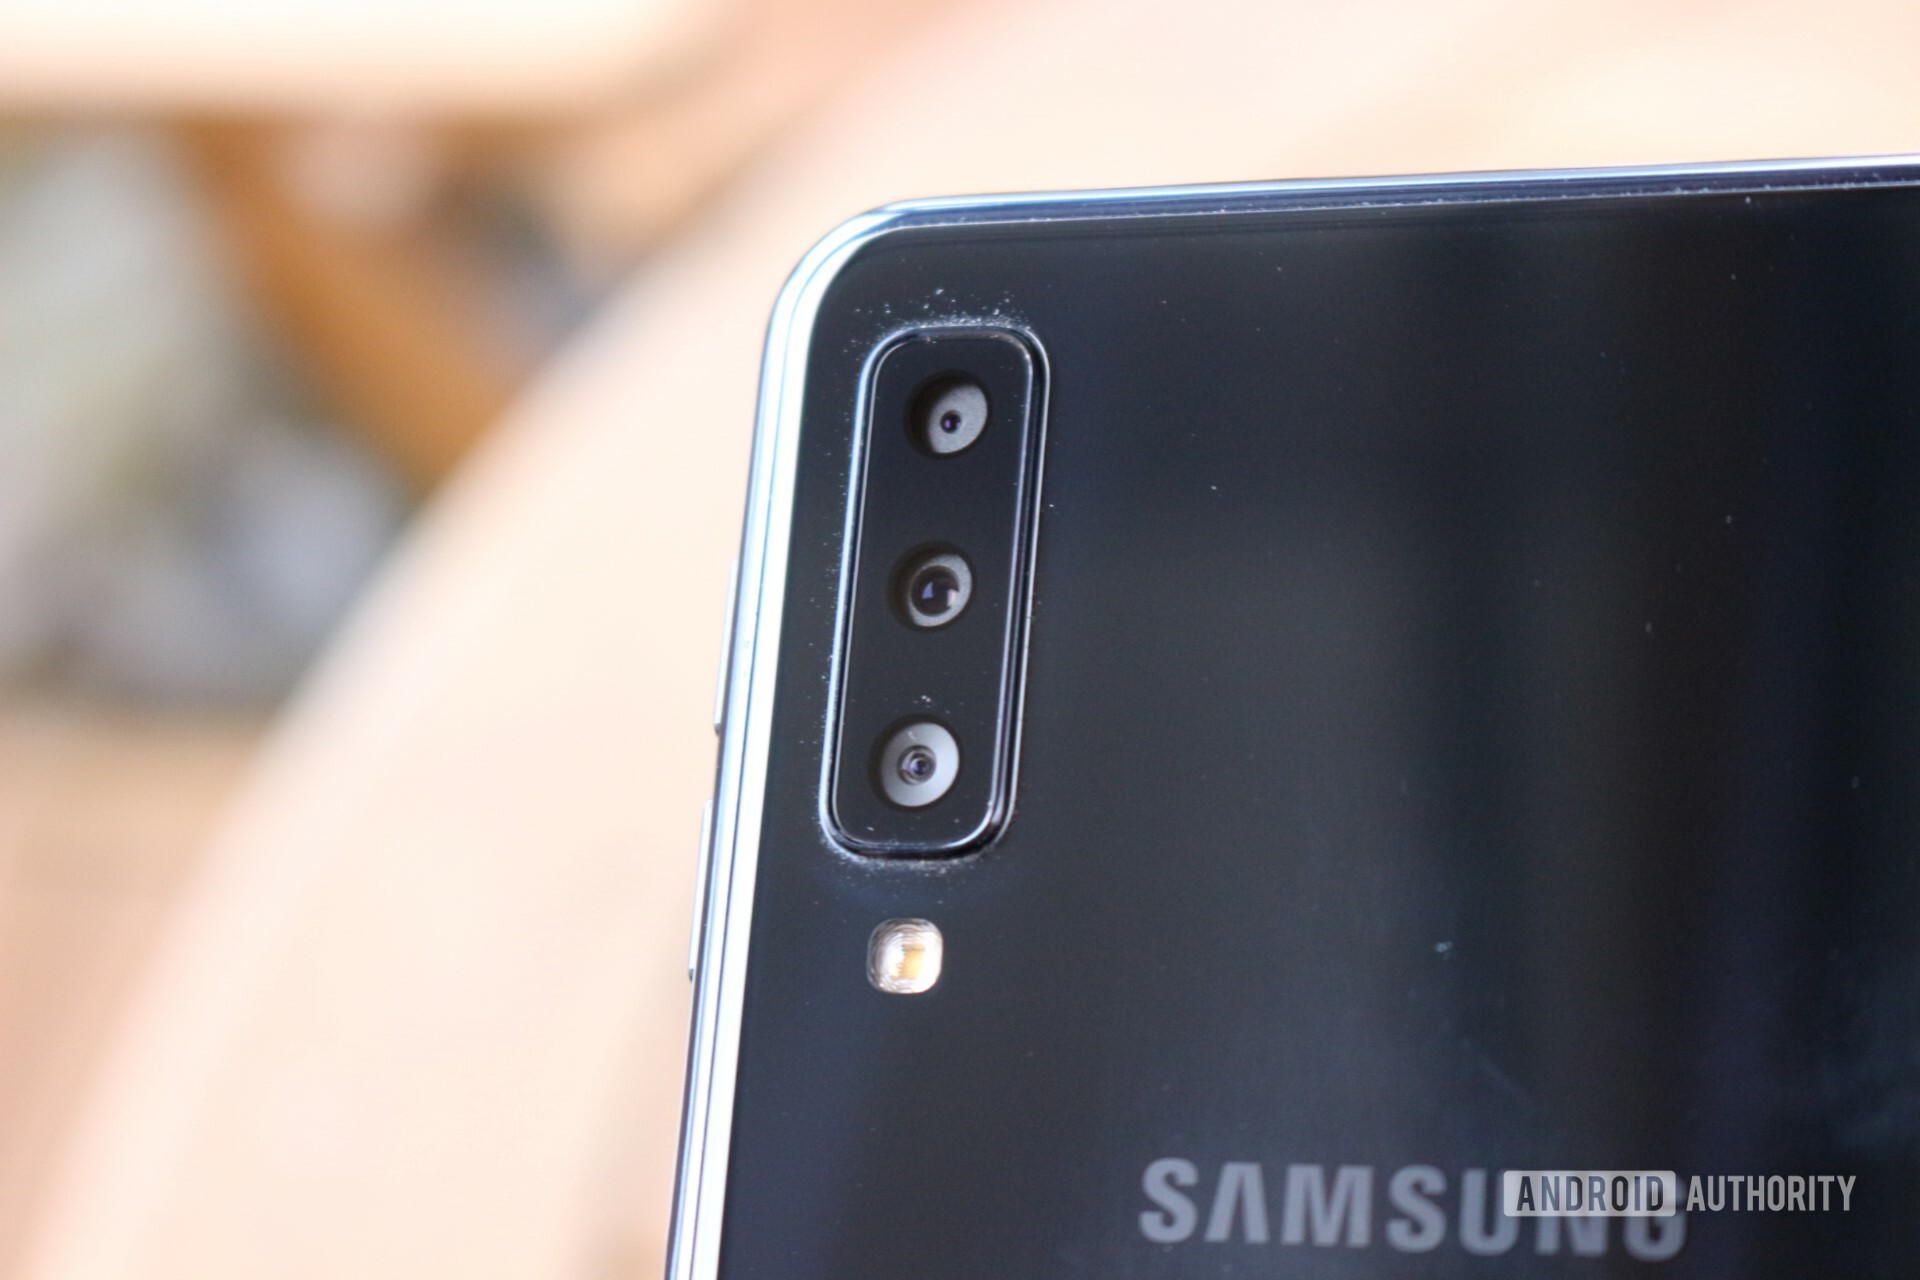 Samsung Galaxy A7 (2018) review: The rise of the mid-range